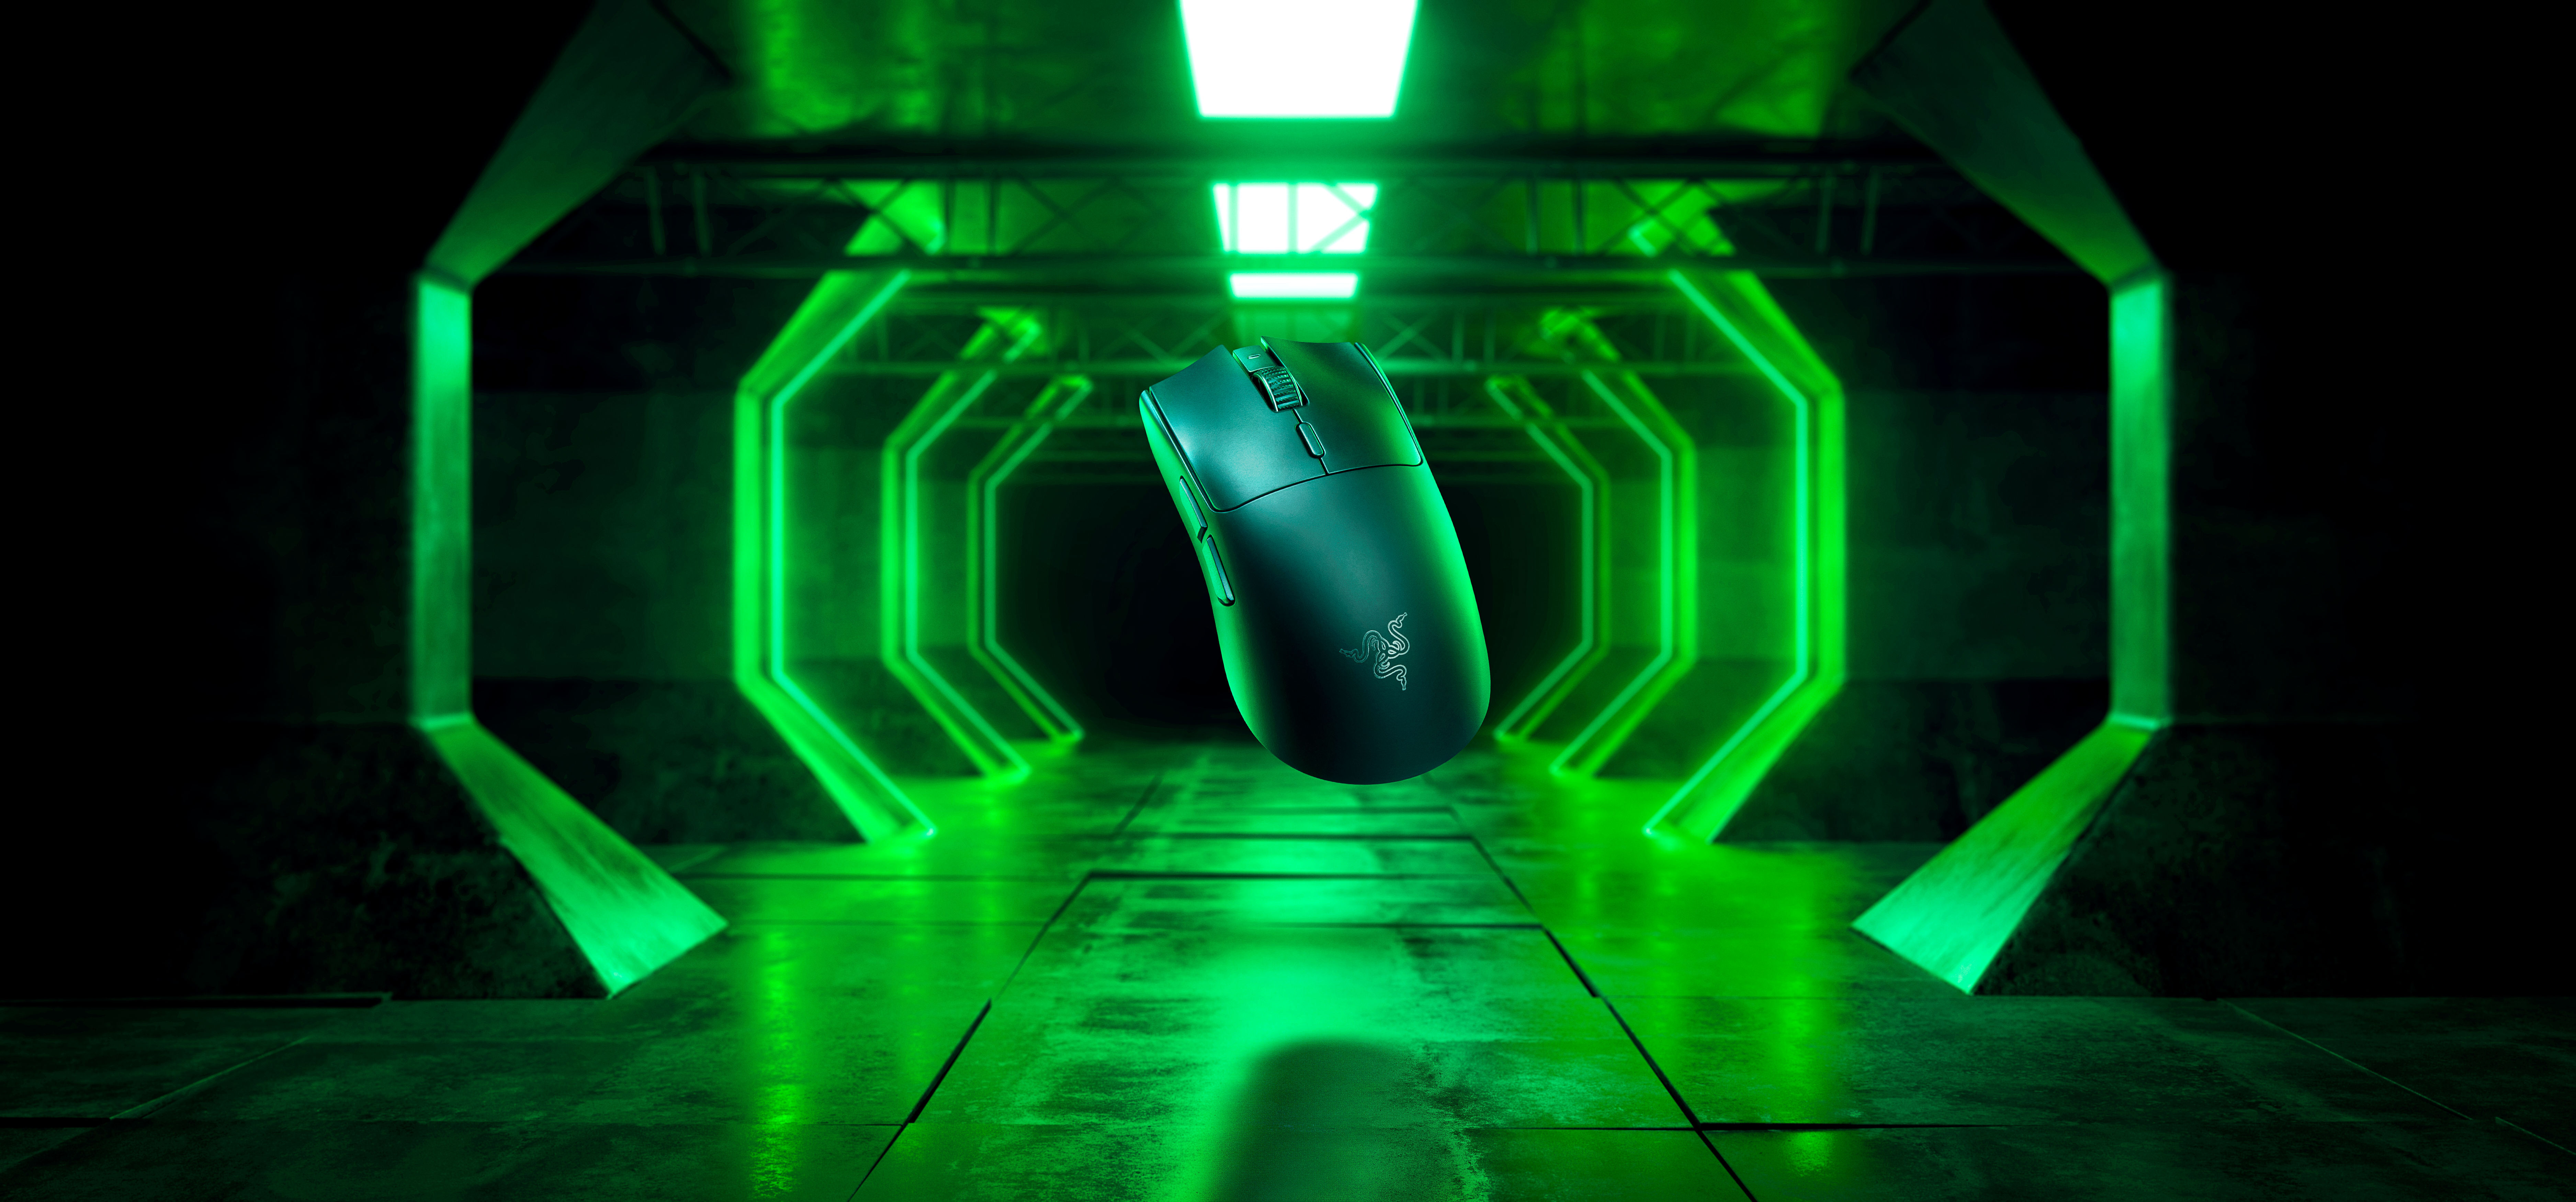 Reservations for the Razer Viper V3 HyperSpeed, which supports an ultra-fast 4000Hz polling rate, will begin on September 27 (Wednesday), and the Razer HyperPolling Wireless Dongle will begin on the same day.